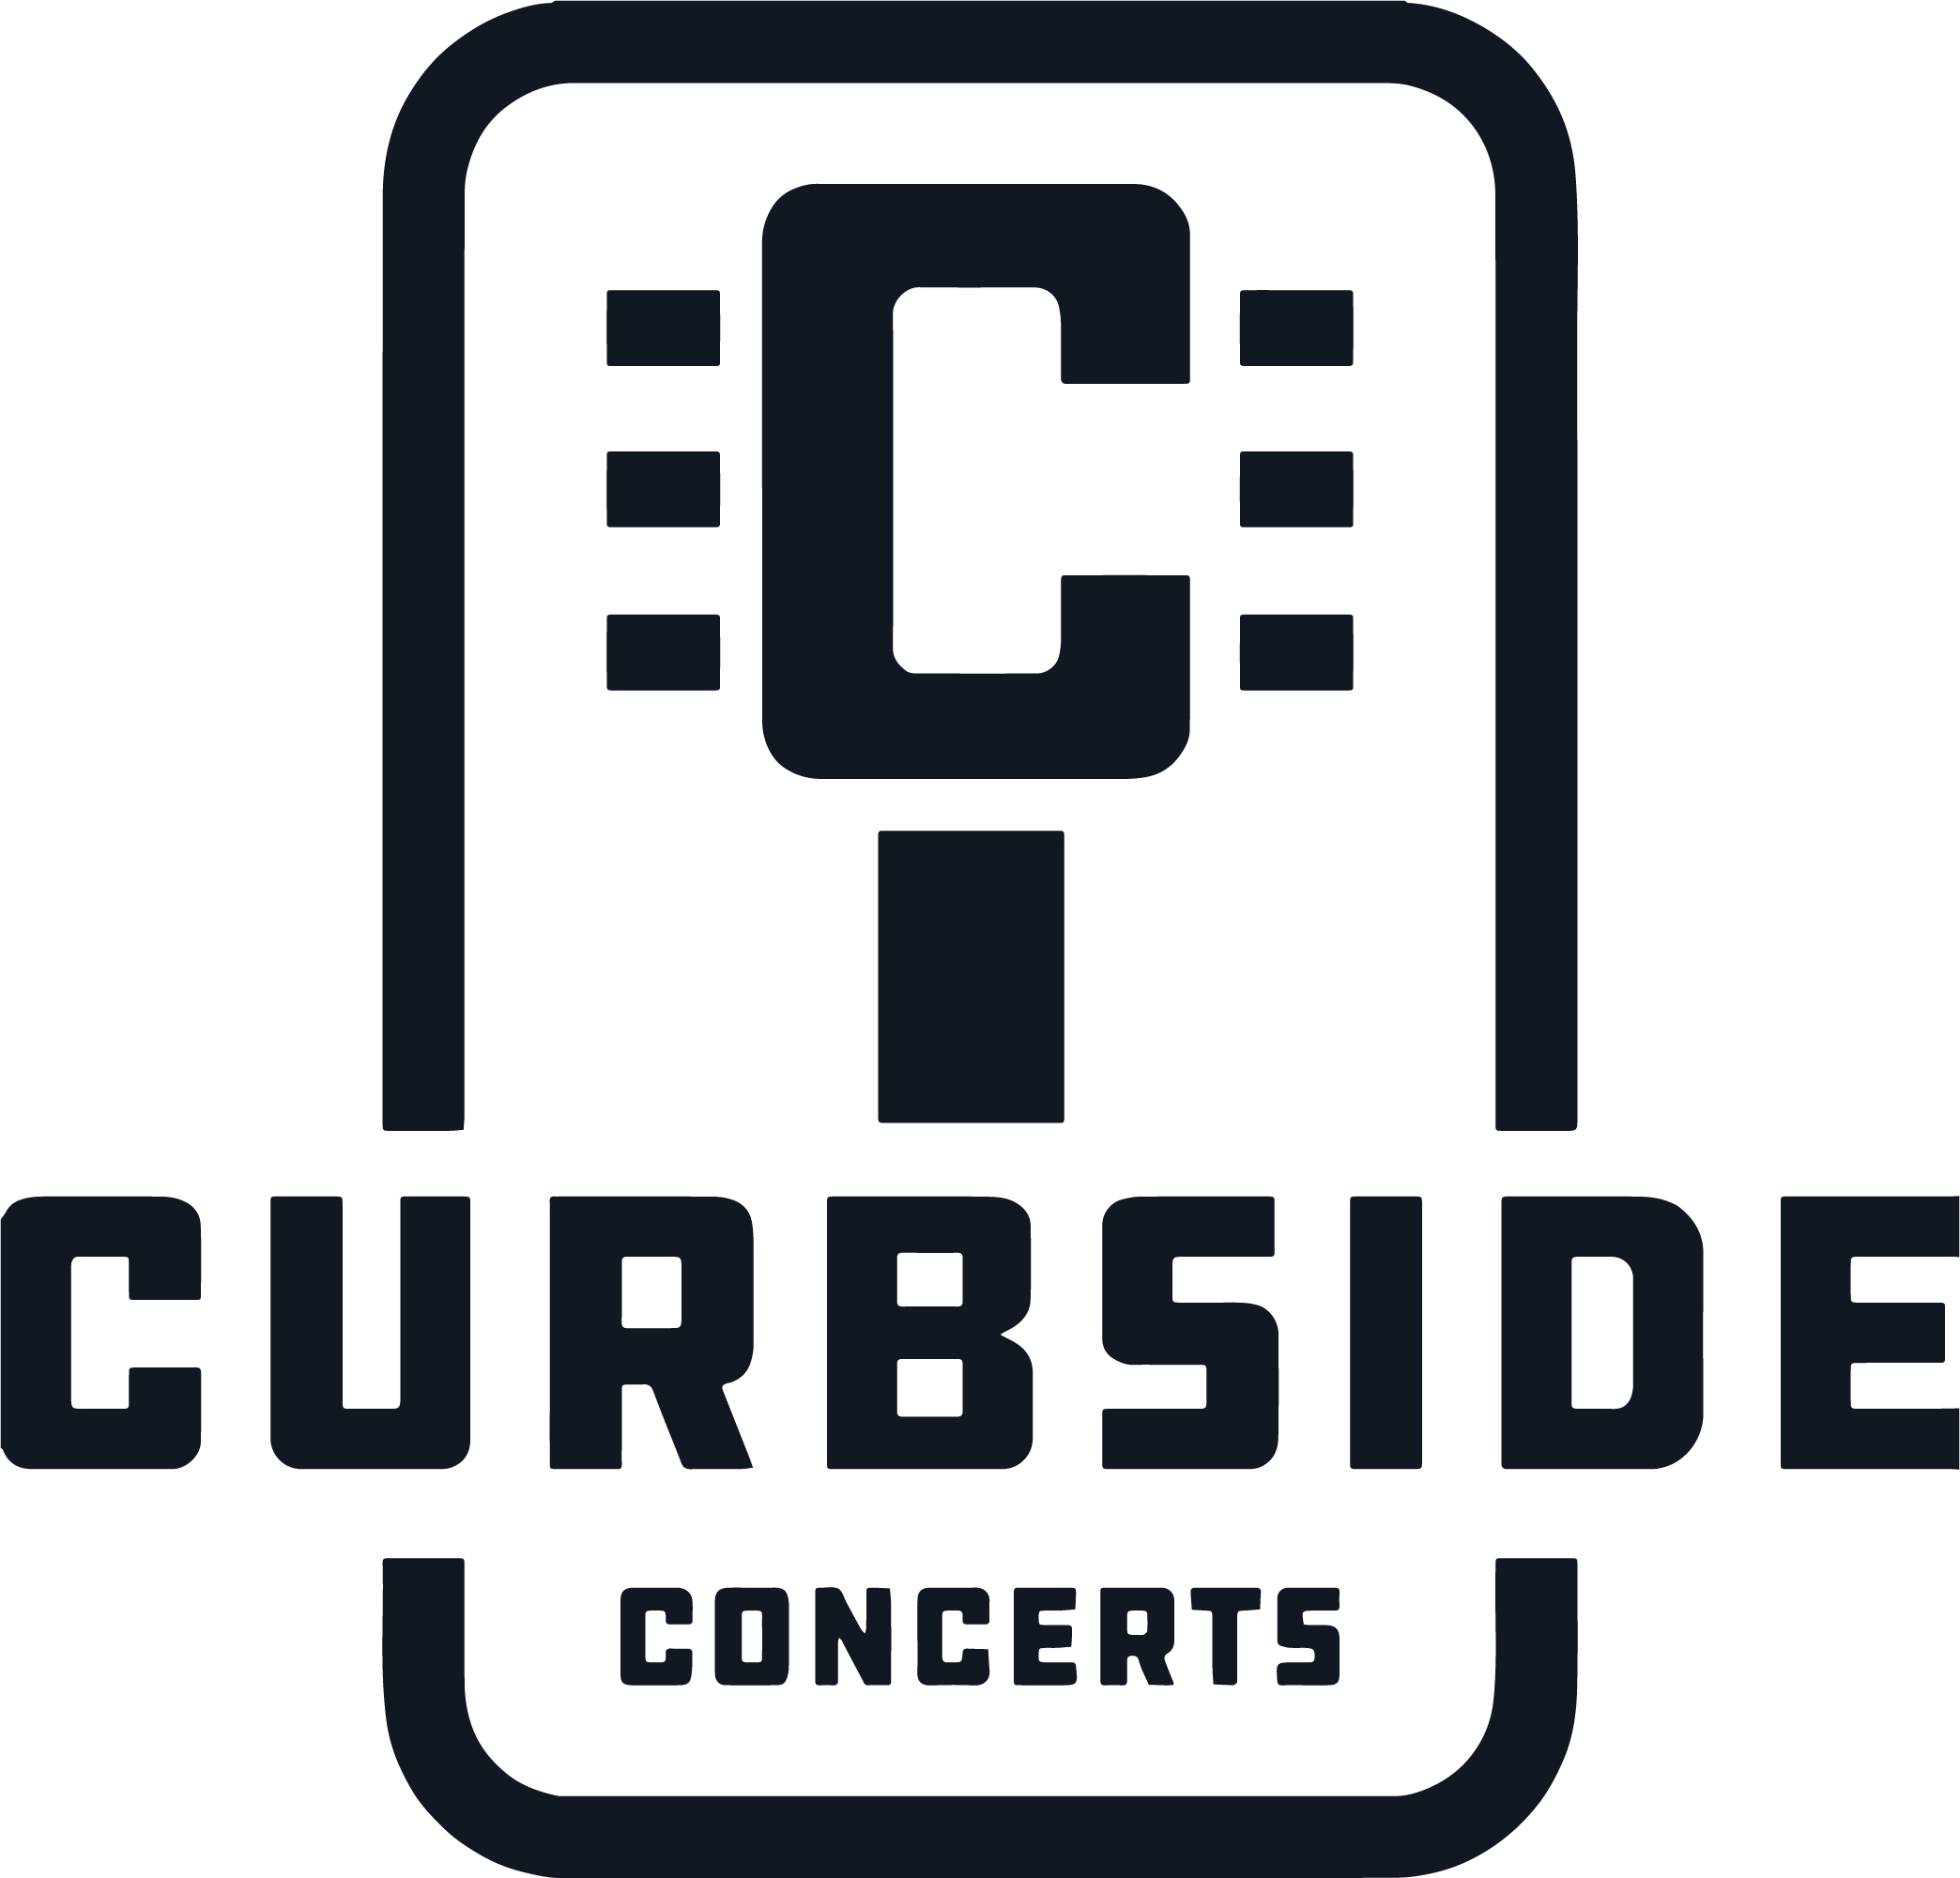 Curbside Concerts